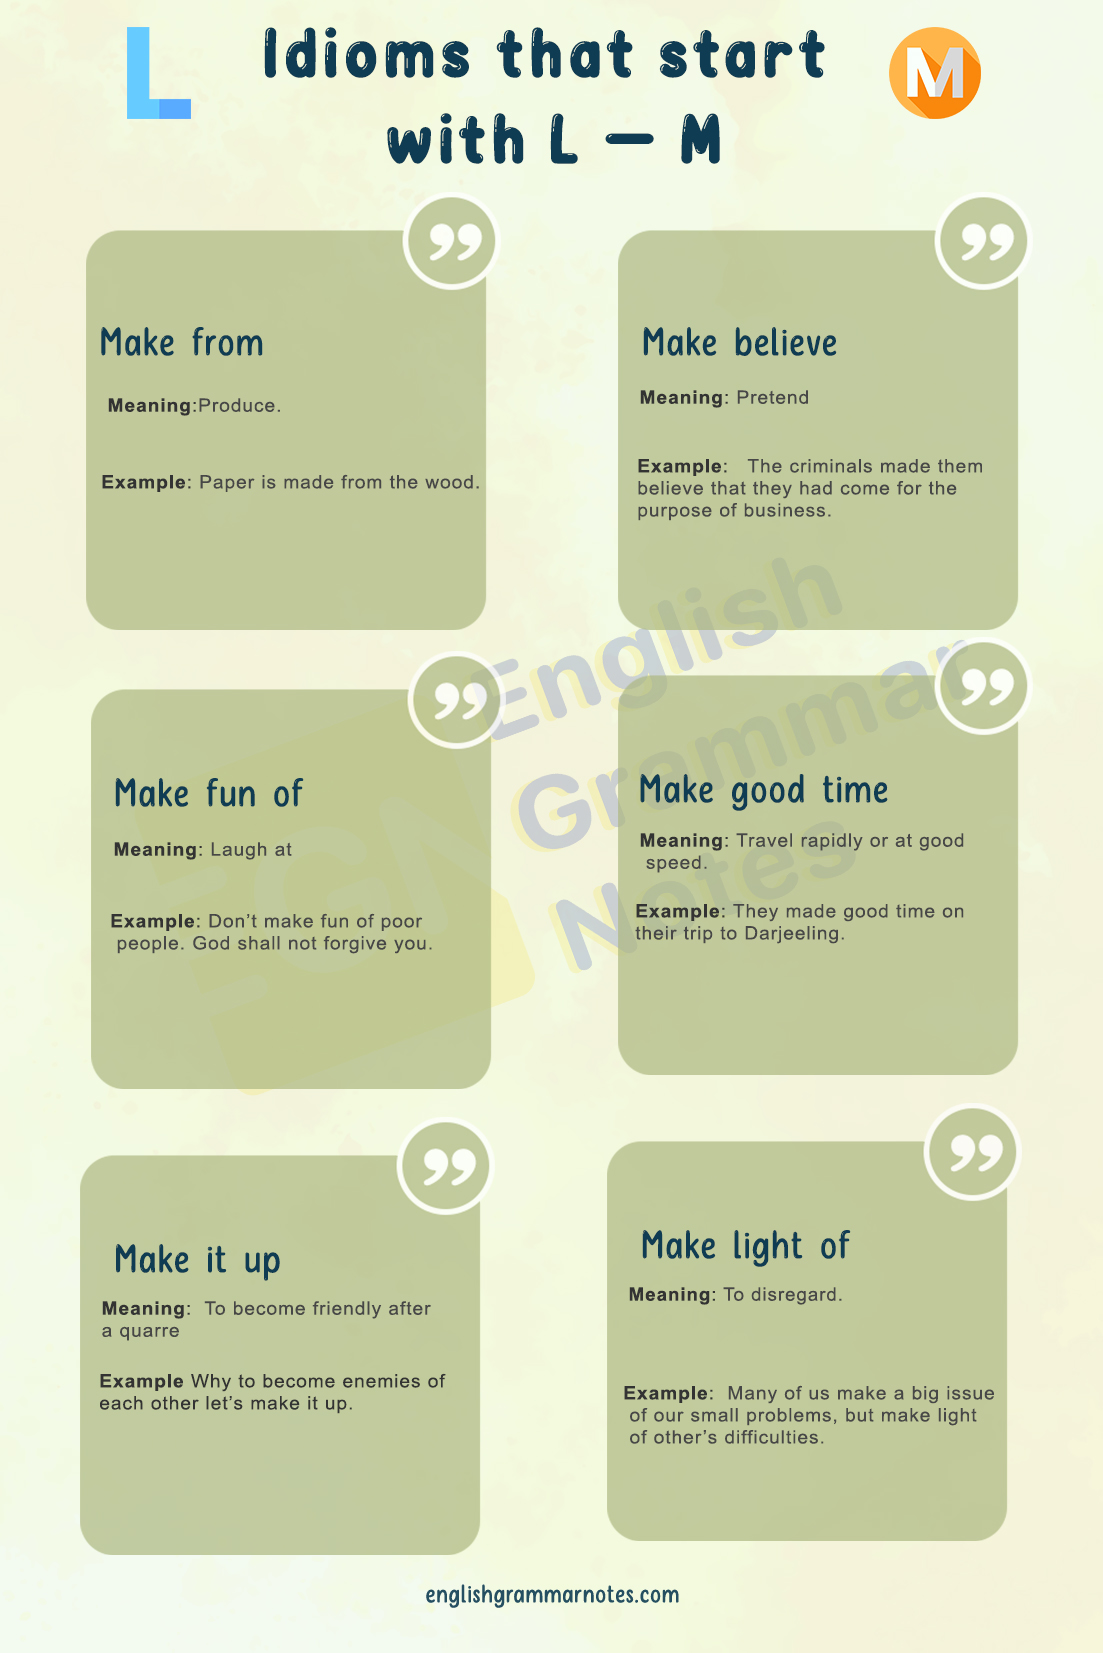 Idioms that start with L - M 2